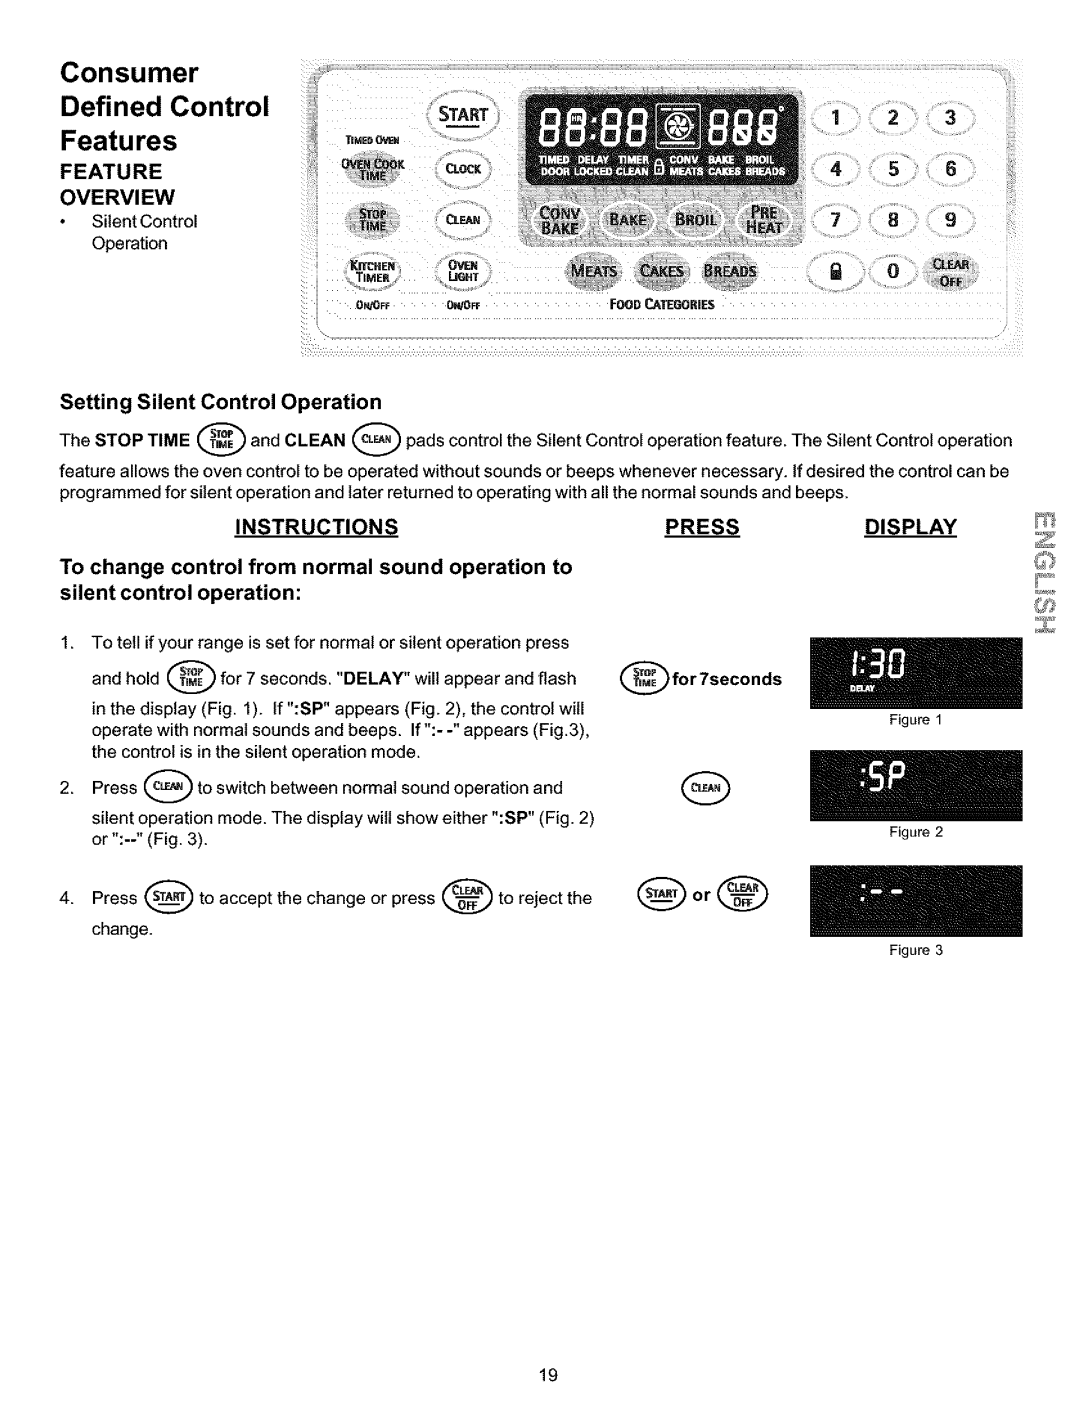 Kenmore 790.99019 Consumer, Defined Control, Feat ure s, Start, Feature, Clock, Overview, Instructions, Press, Display 